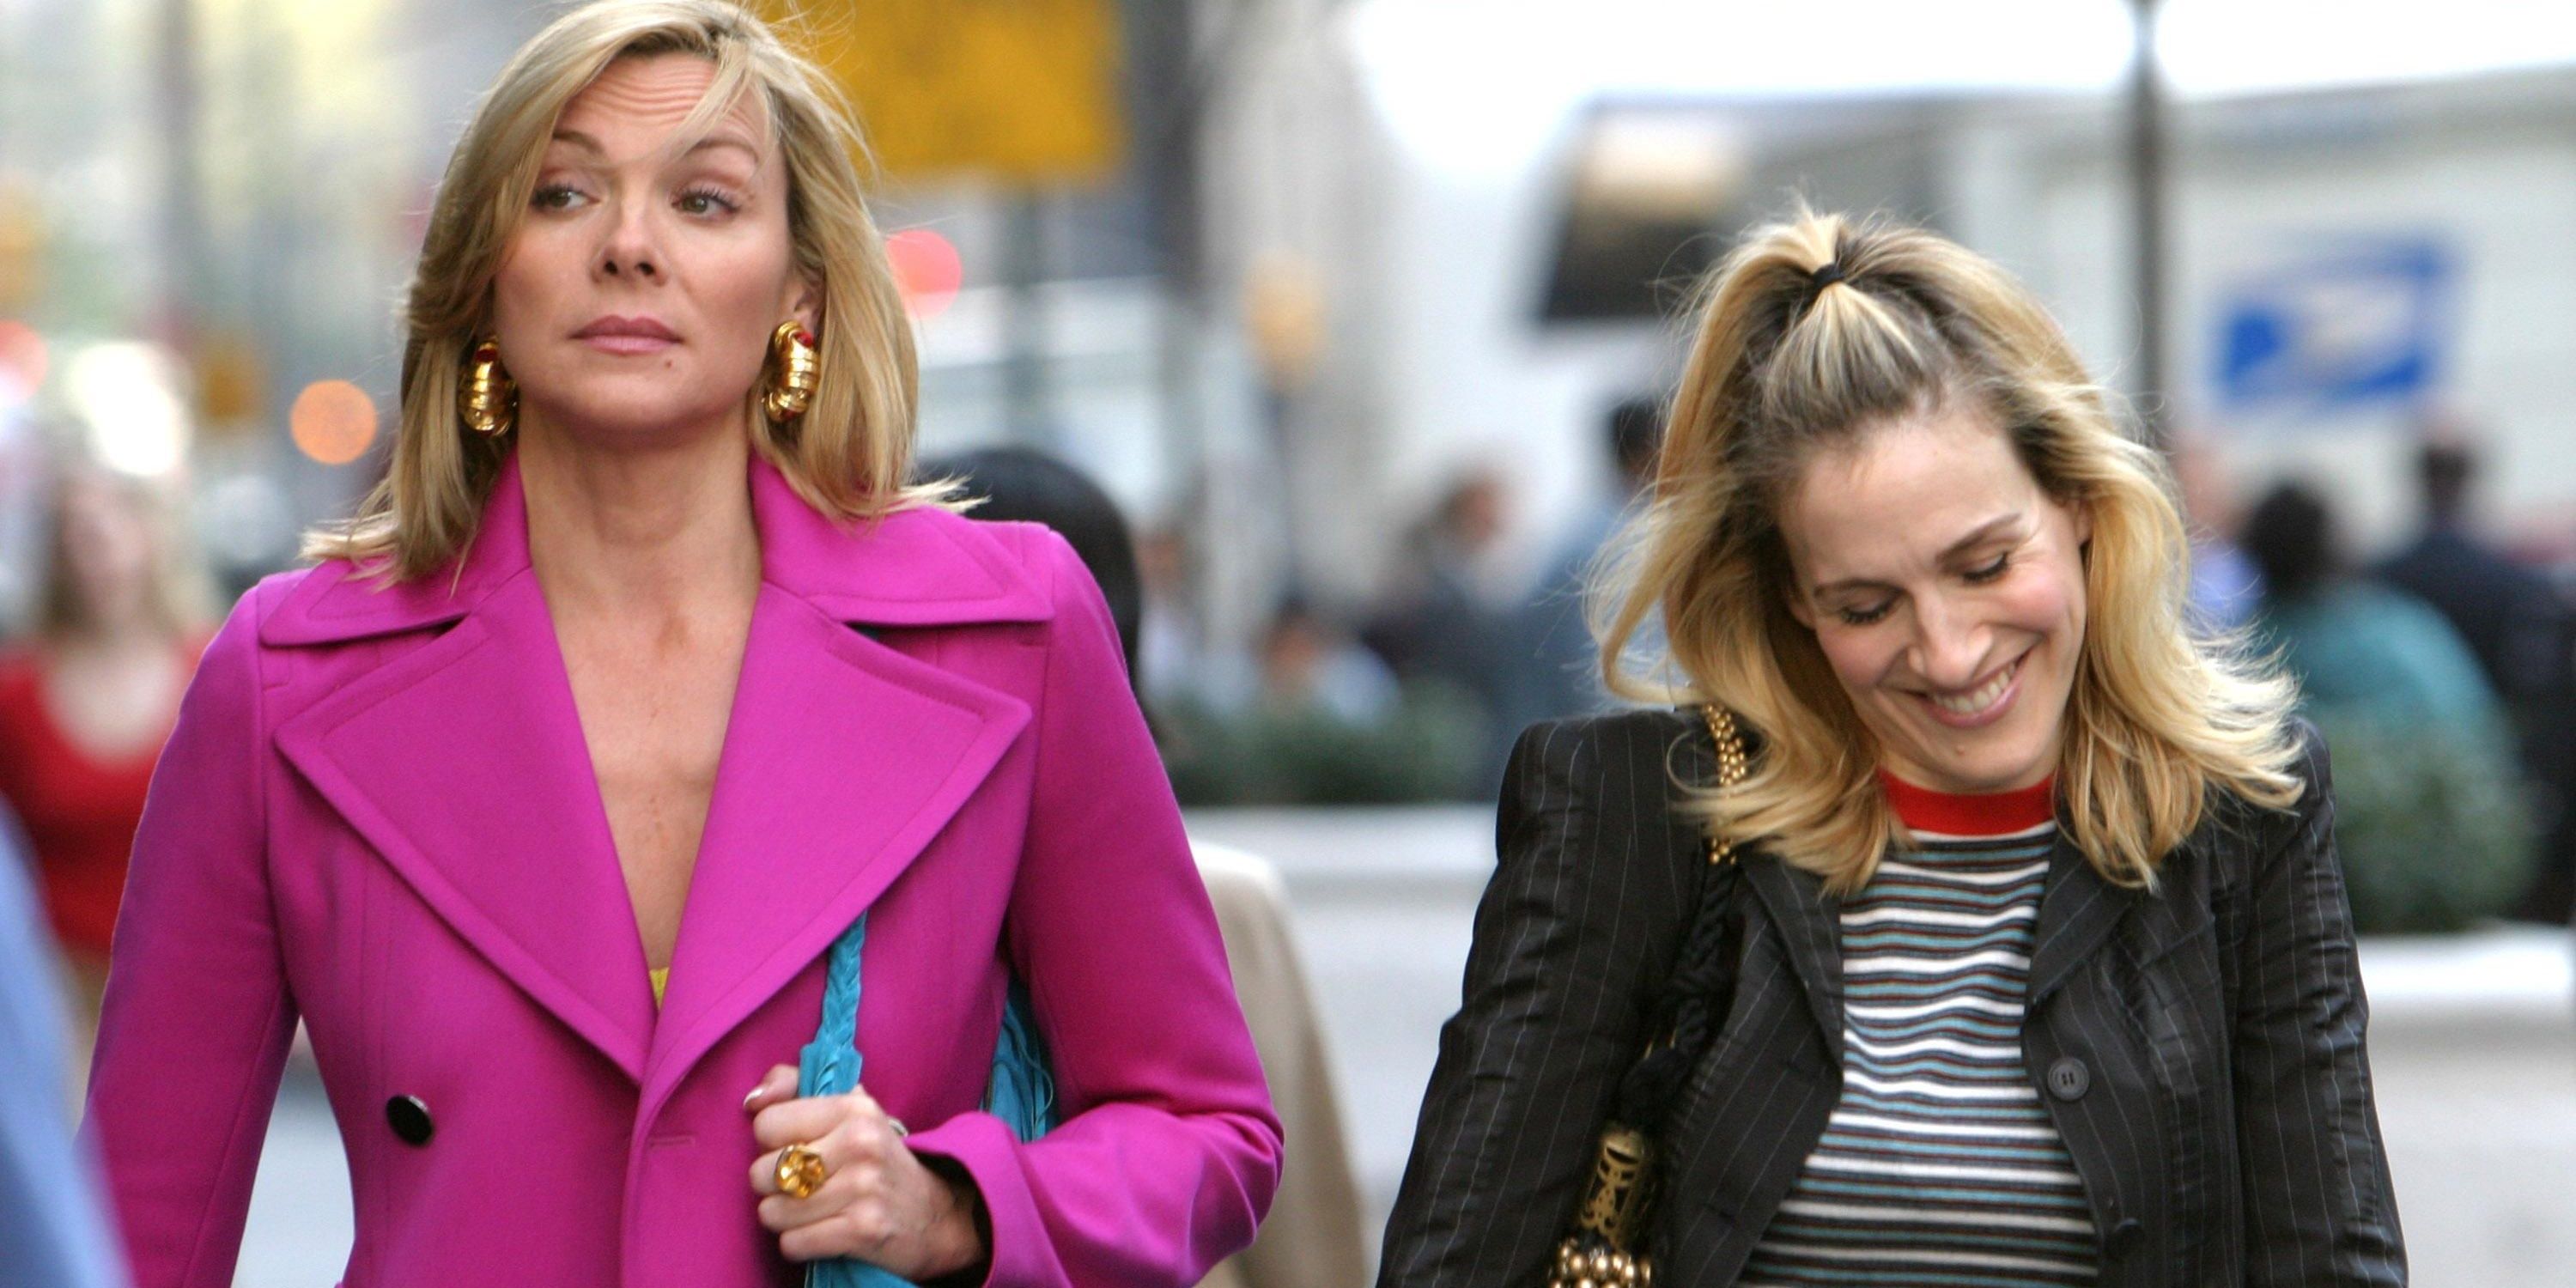 Kim Cattrall as Samantha + Sarah Jessica Parker as Carrie in Sex and the City Entry 3